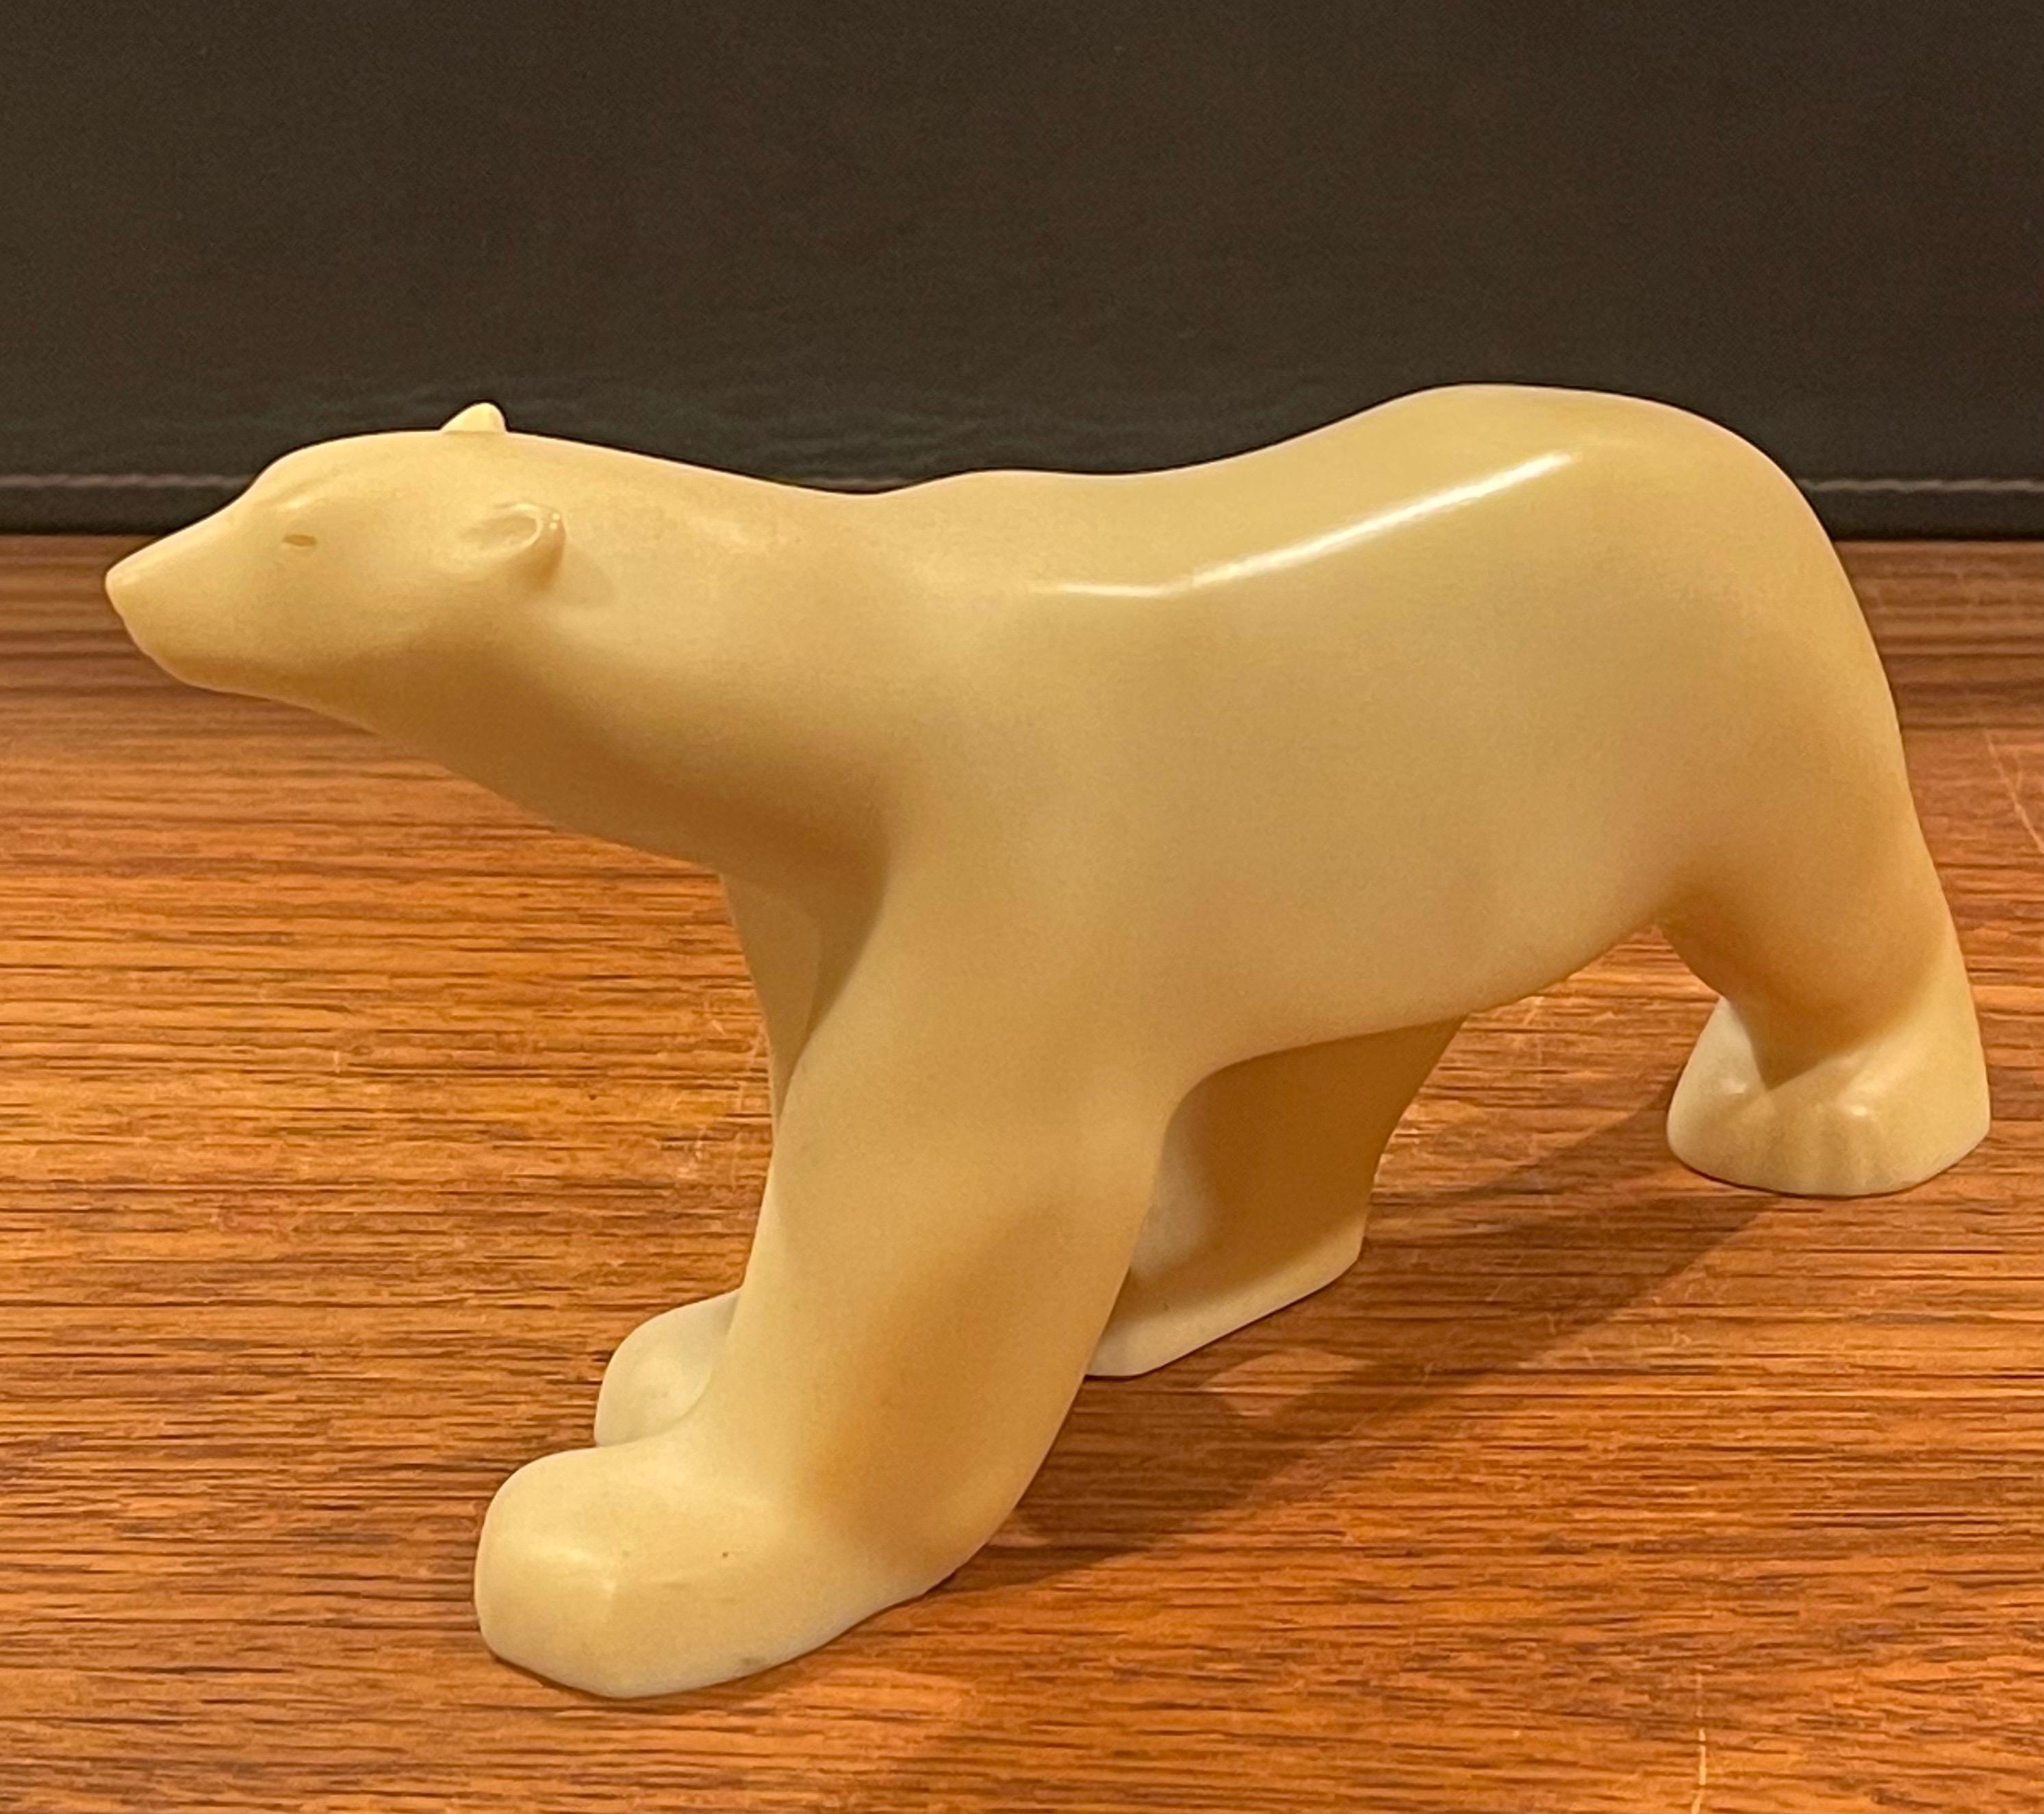 Cast Resin Polar Bear Sculpture by Francois Pompon for the Moma Collection For Sale 3